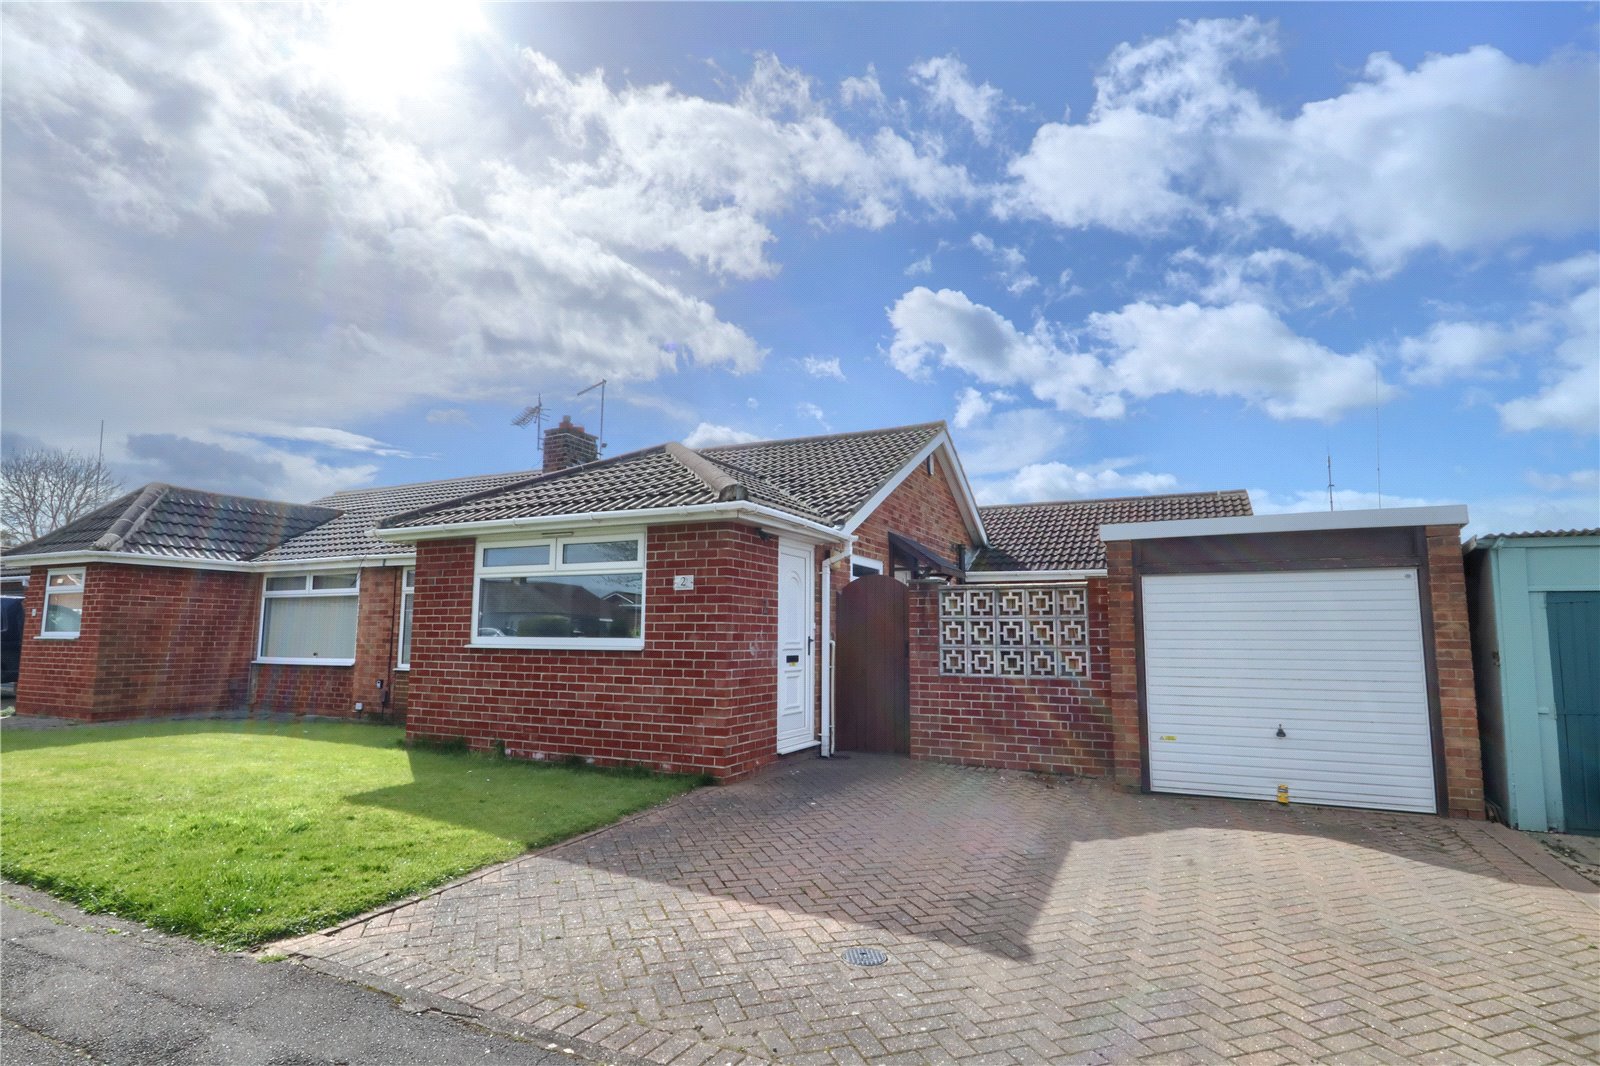 2 bed bungalow for sale in Kenilworth Way, Redcar 1